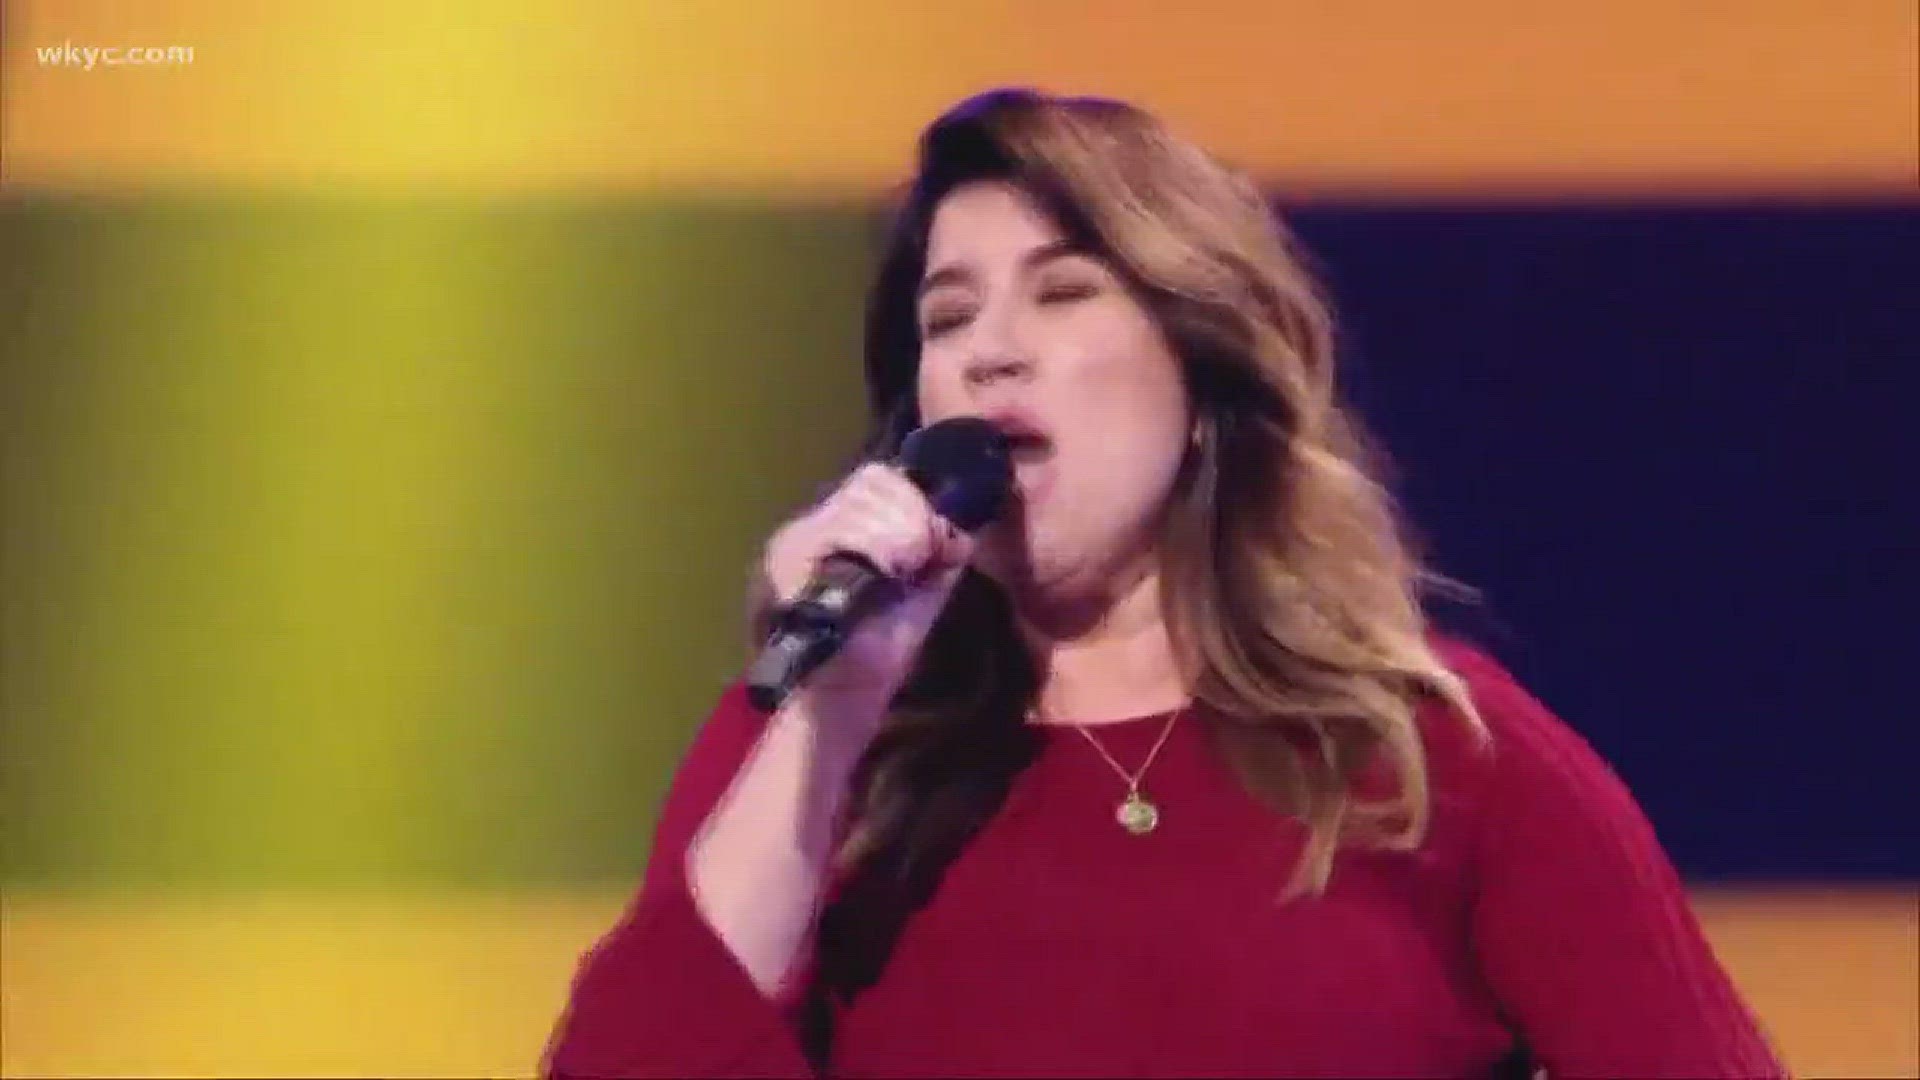 Local mom competes in "The Voice: Holland"